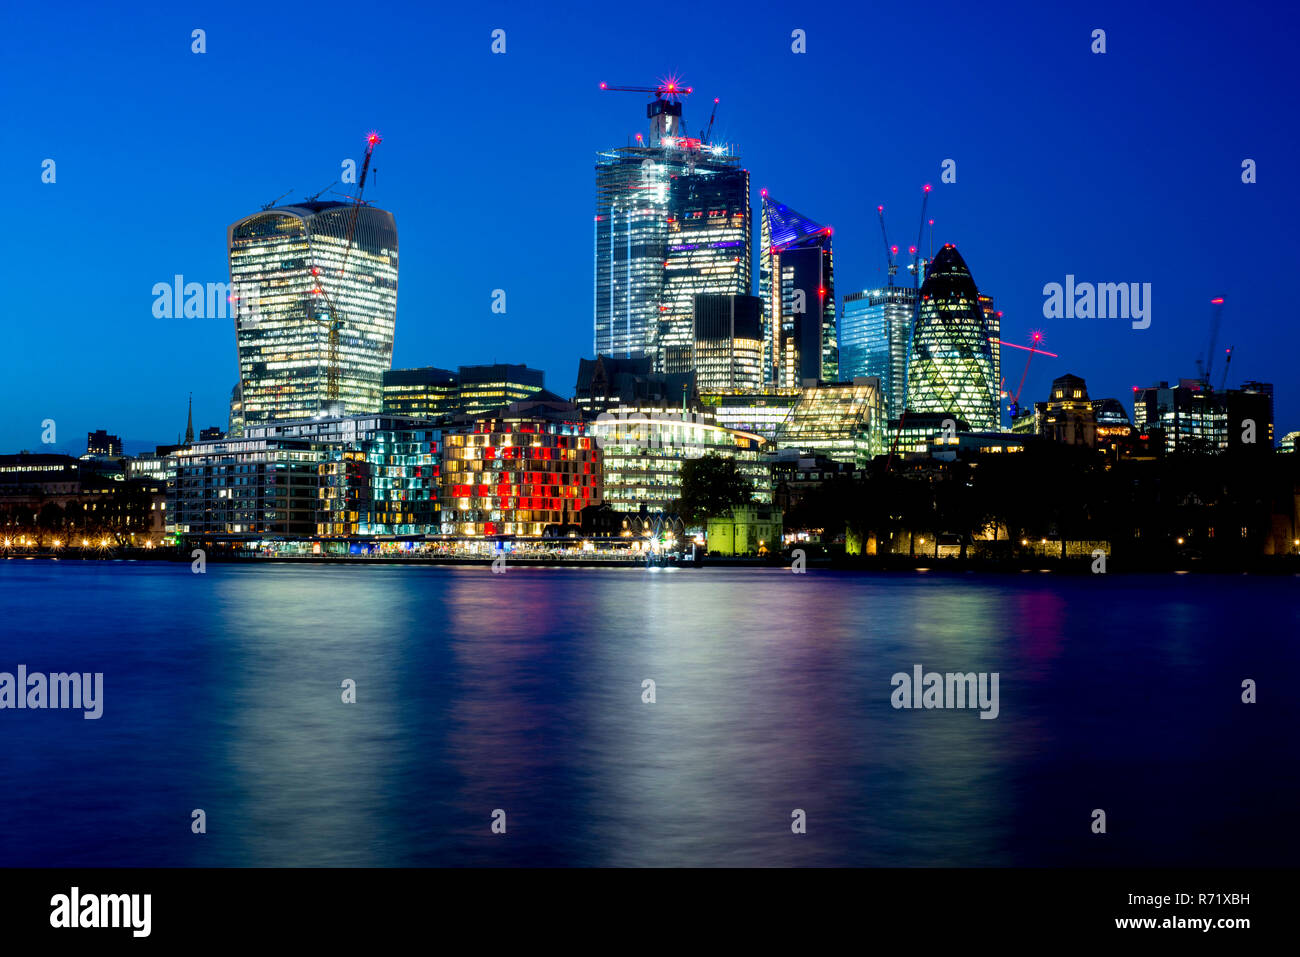 The City of London skyline and River Thames at night. Stock Photo